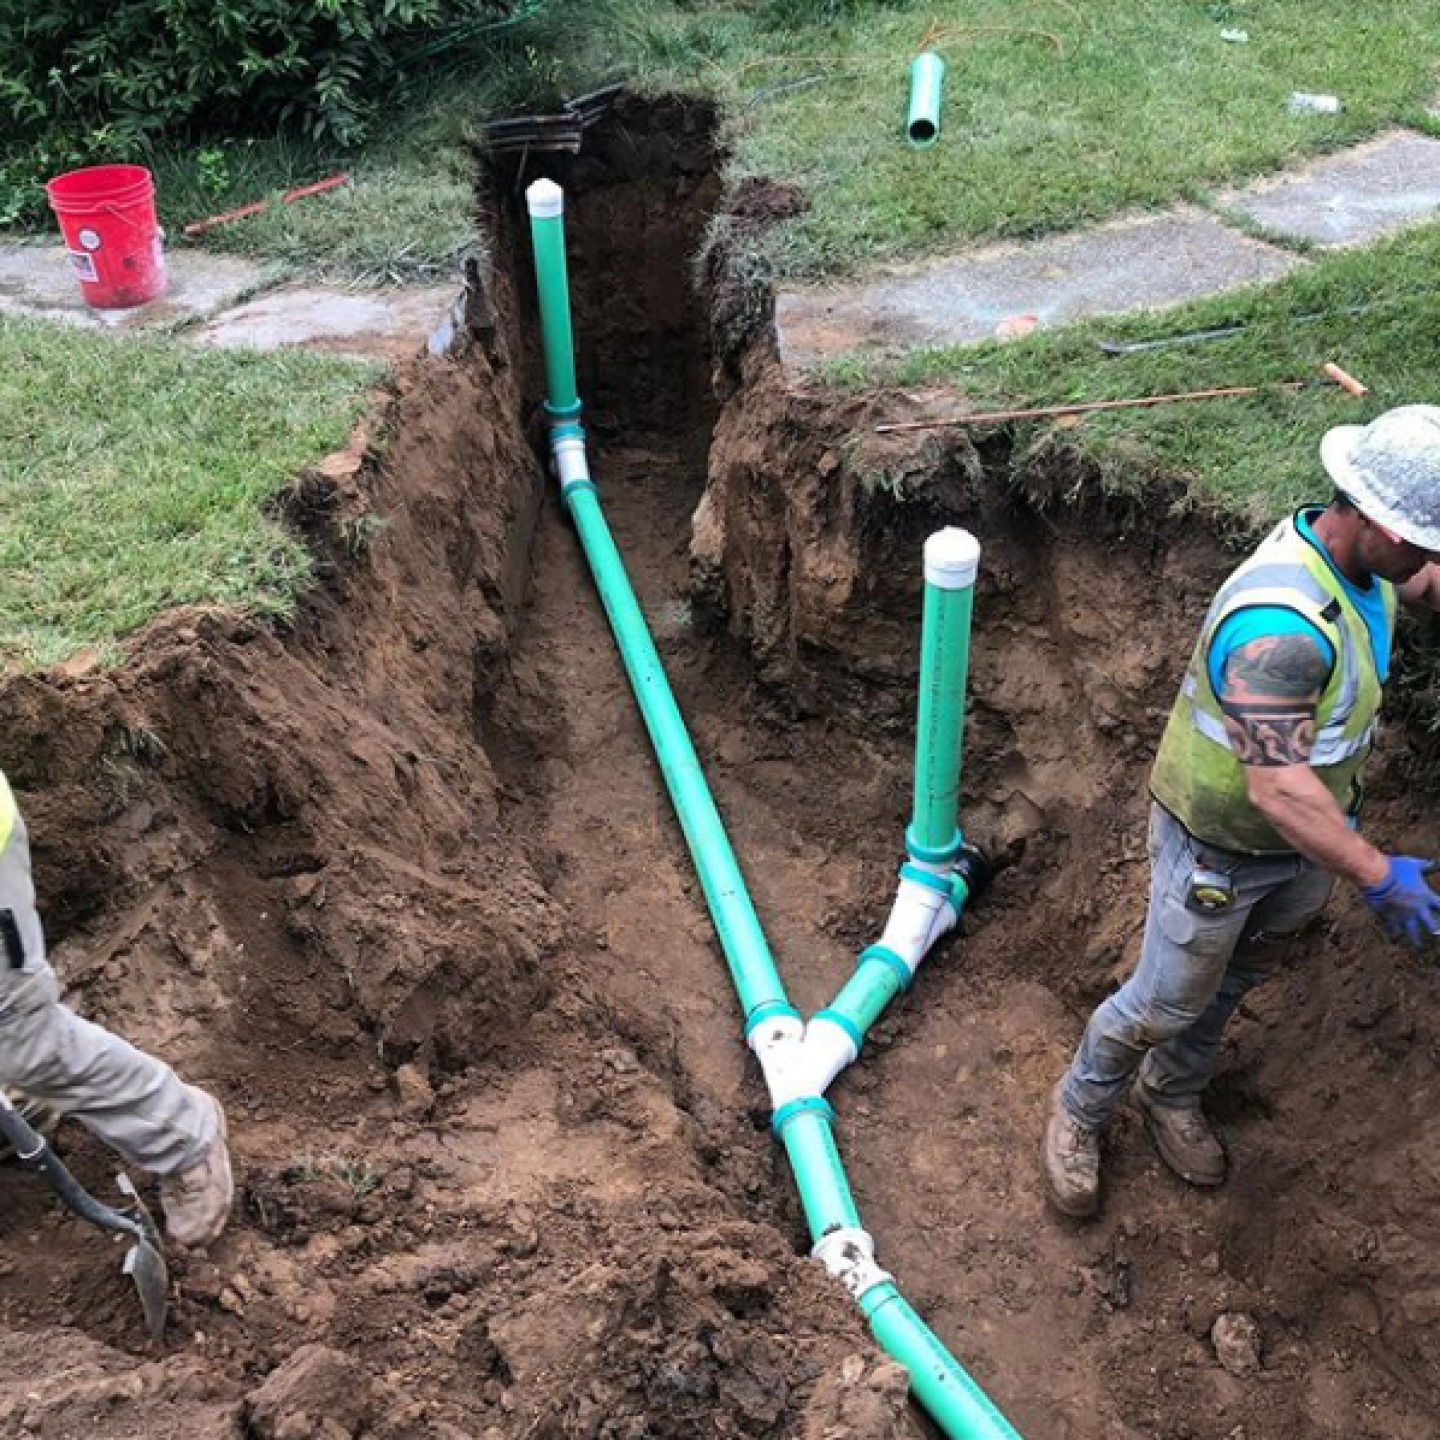 Men are digging a hole in the ground to install green pipes